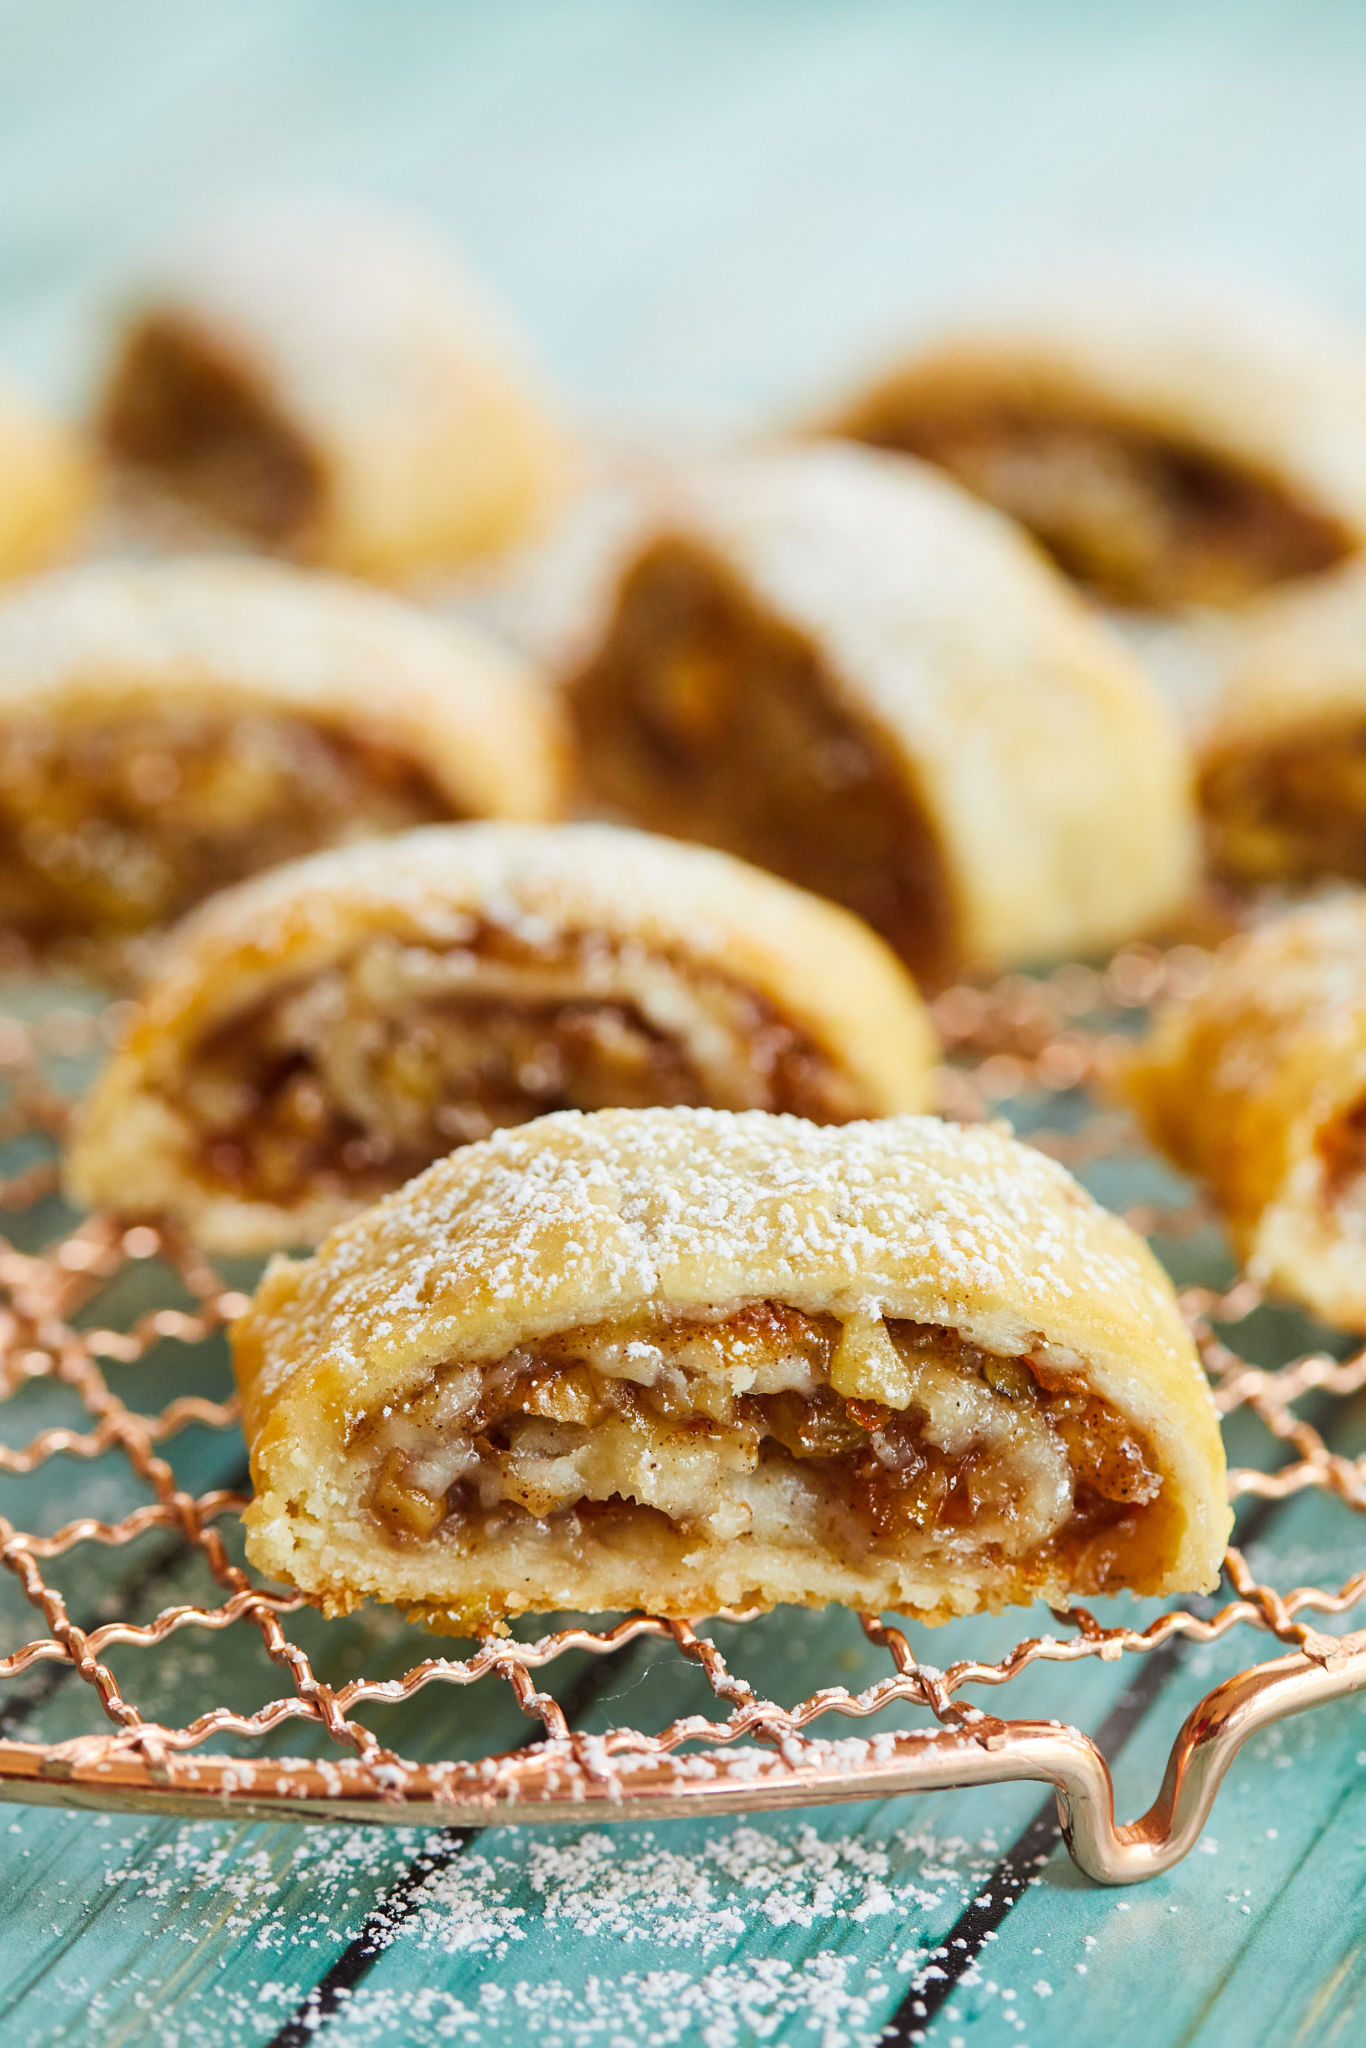 A close up of my rugelach, filled with jam, nuts, and raisins.